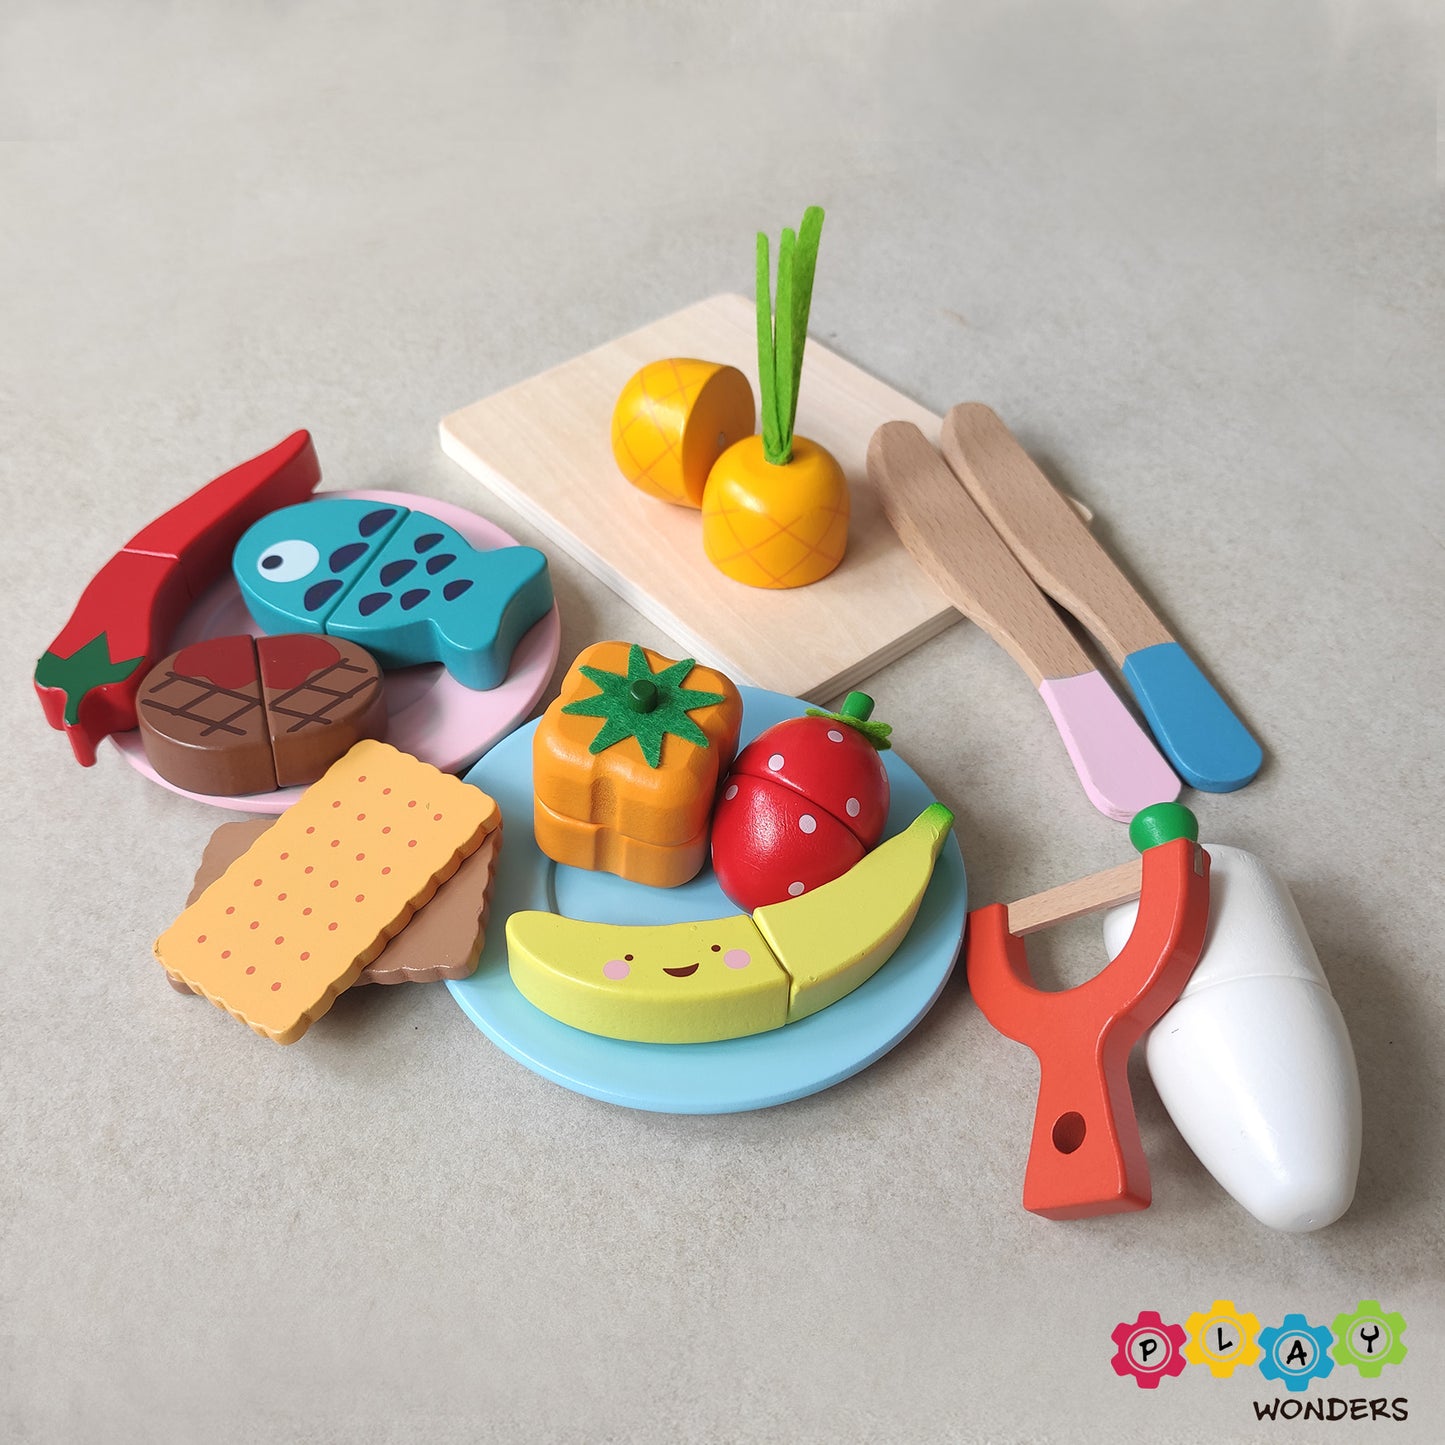 Magnetic Wooden Chopping Toys (16 Pieces)